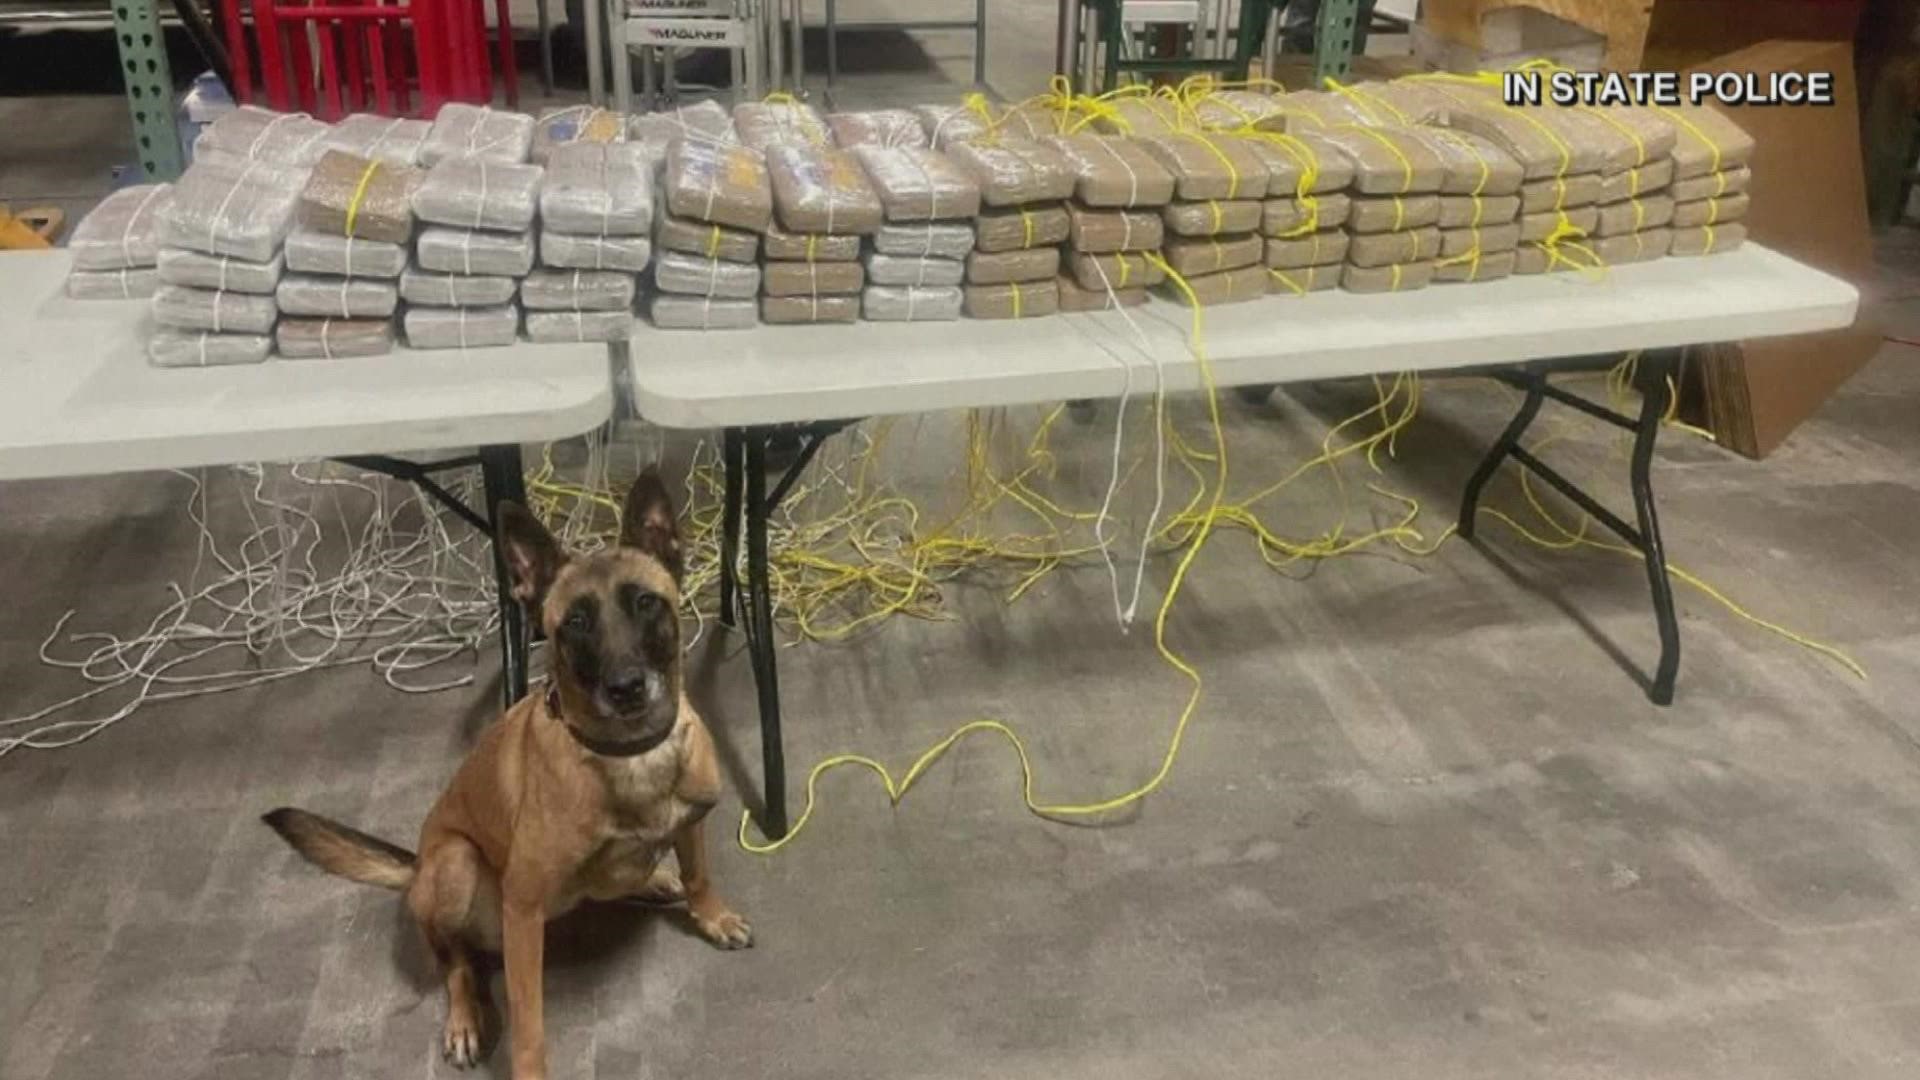 IMPD reports hundreds of pounds of drugs are off central Indiana's streets.